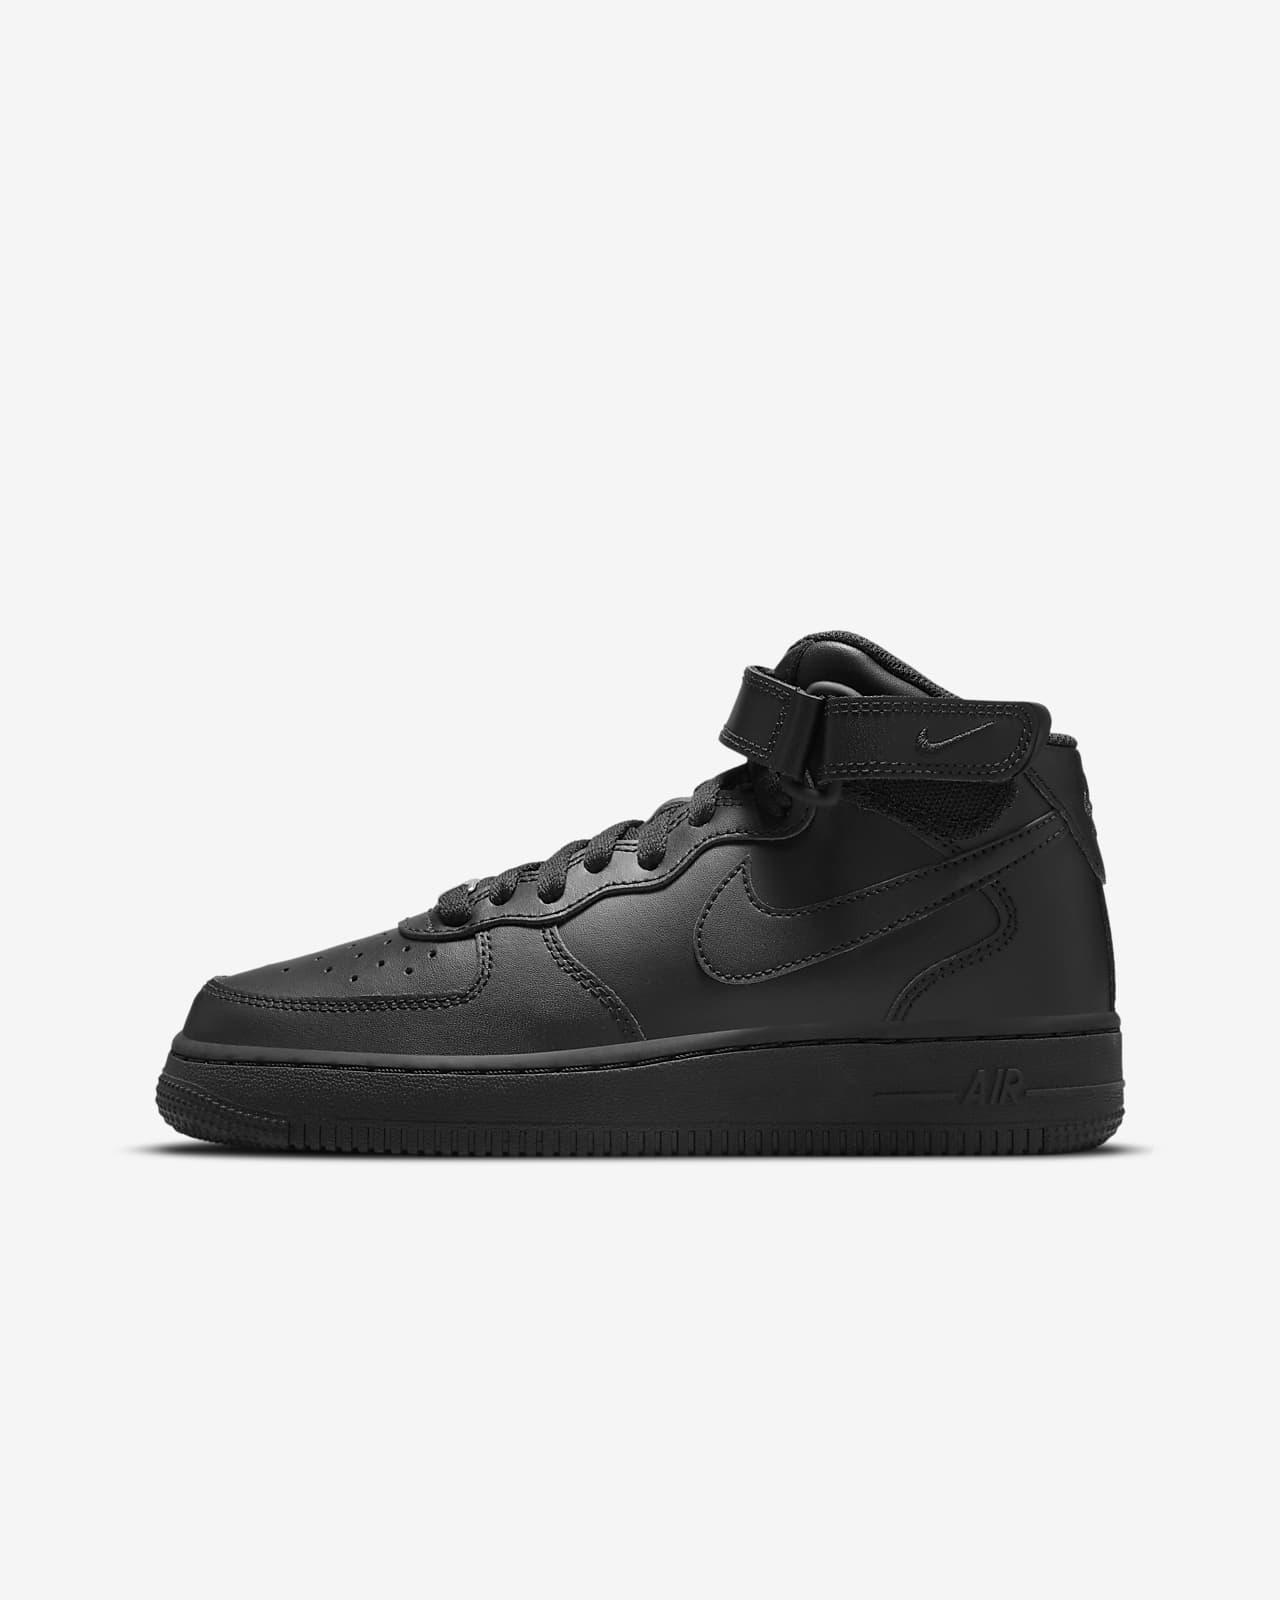 air force ones nz